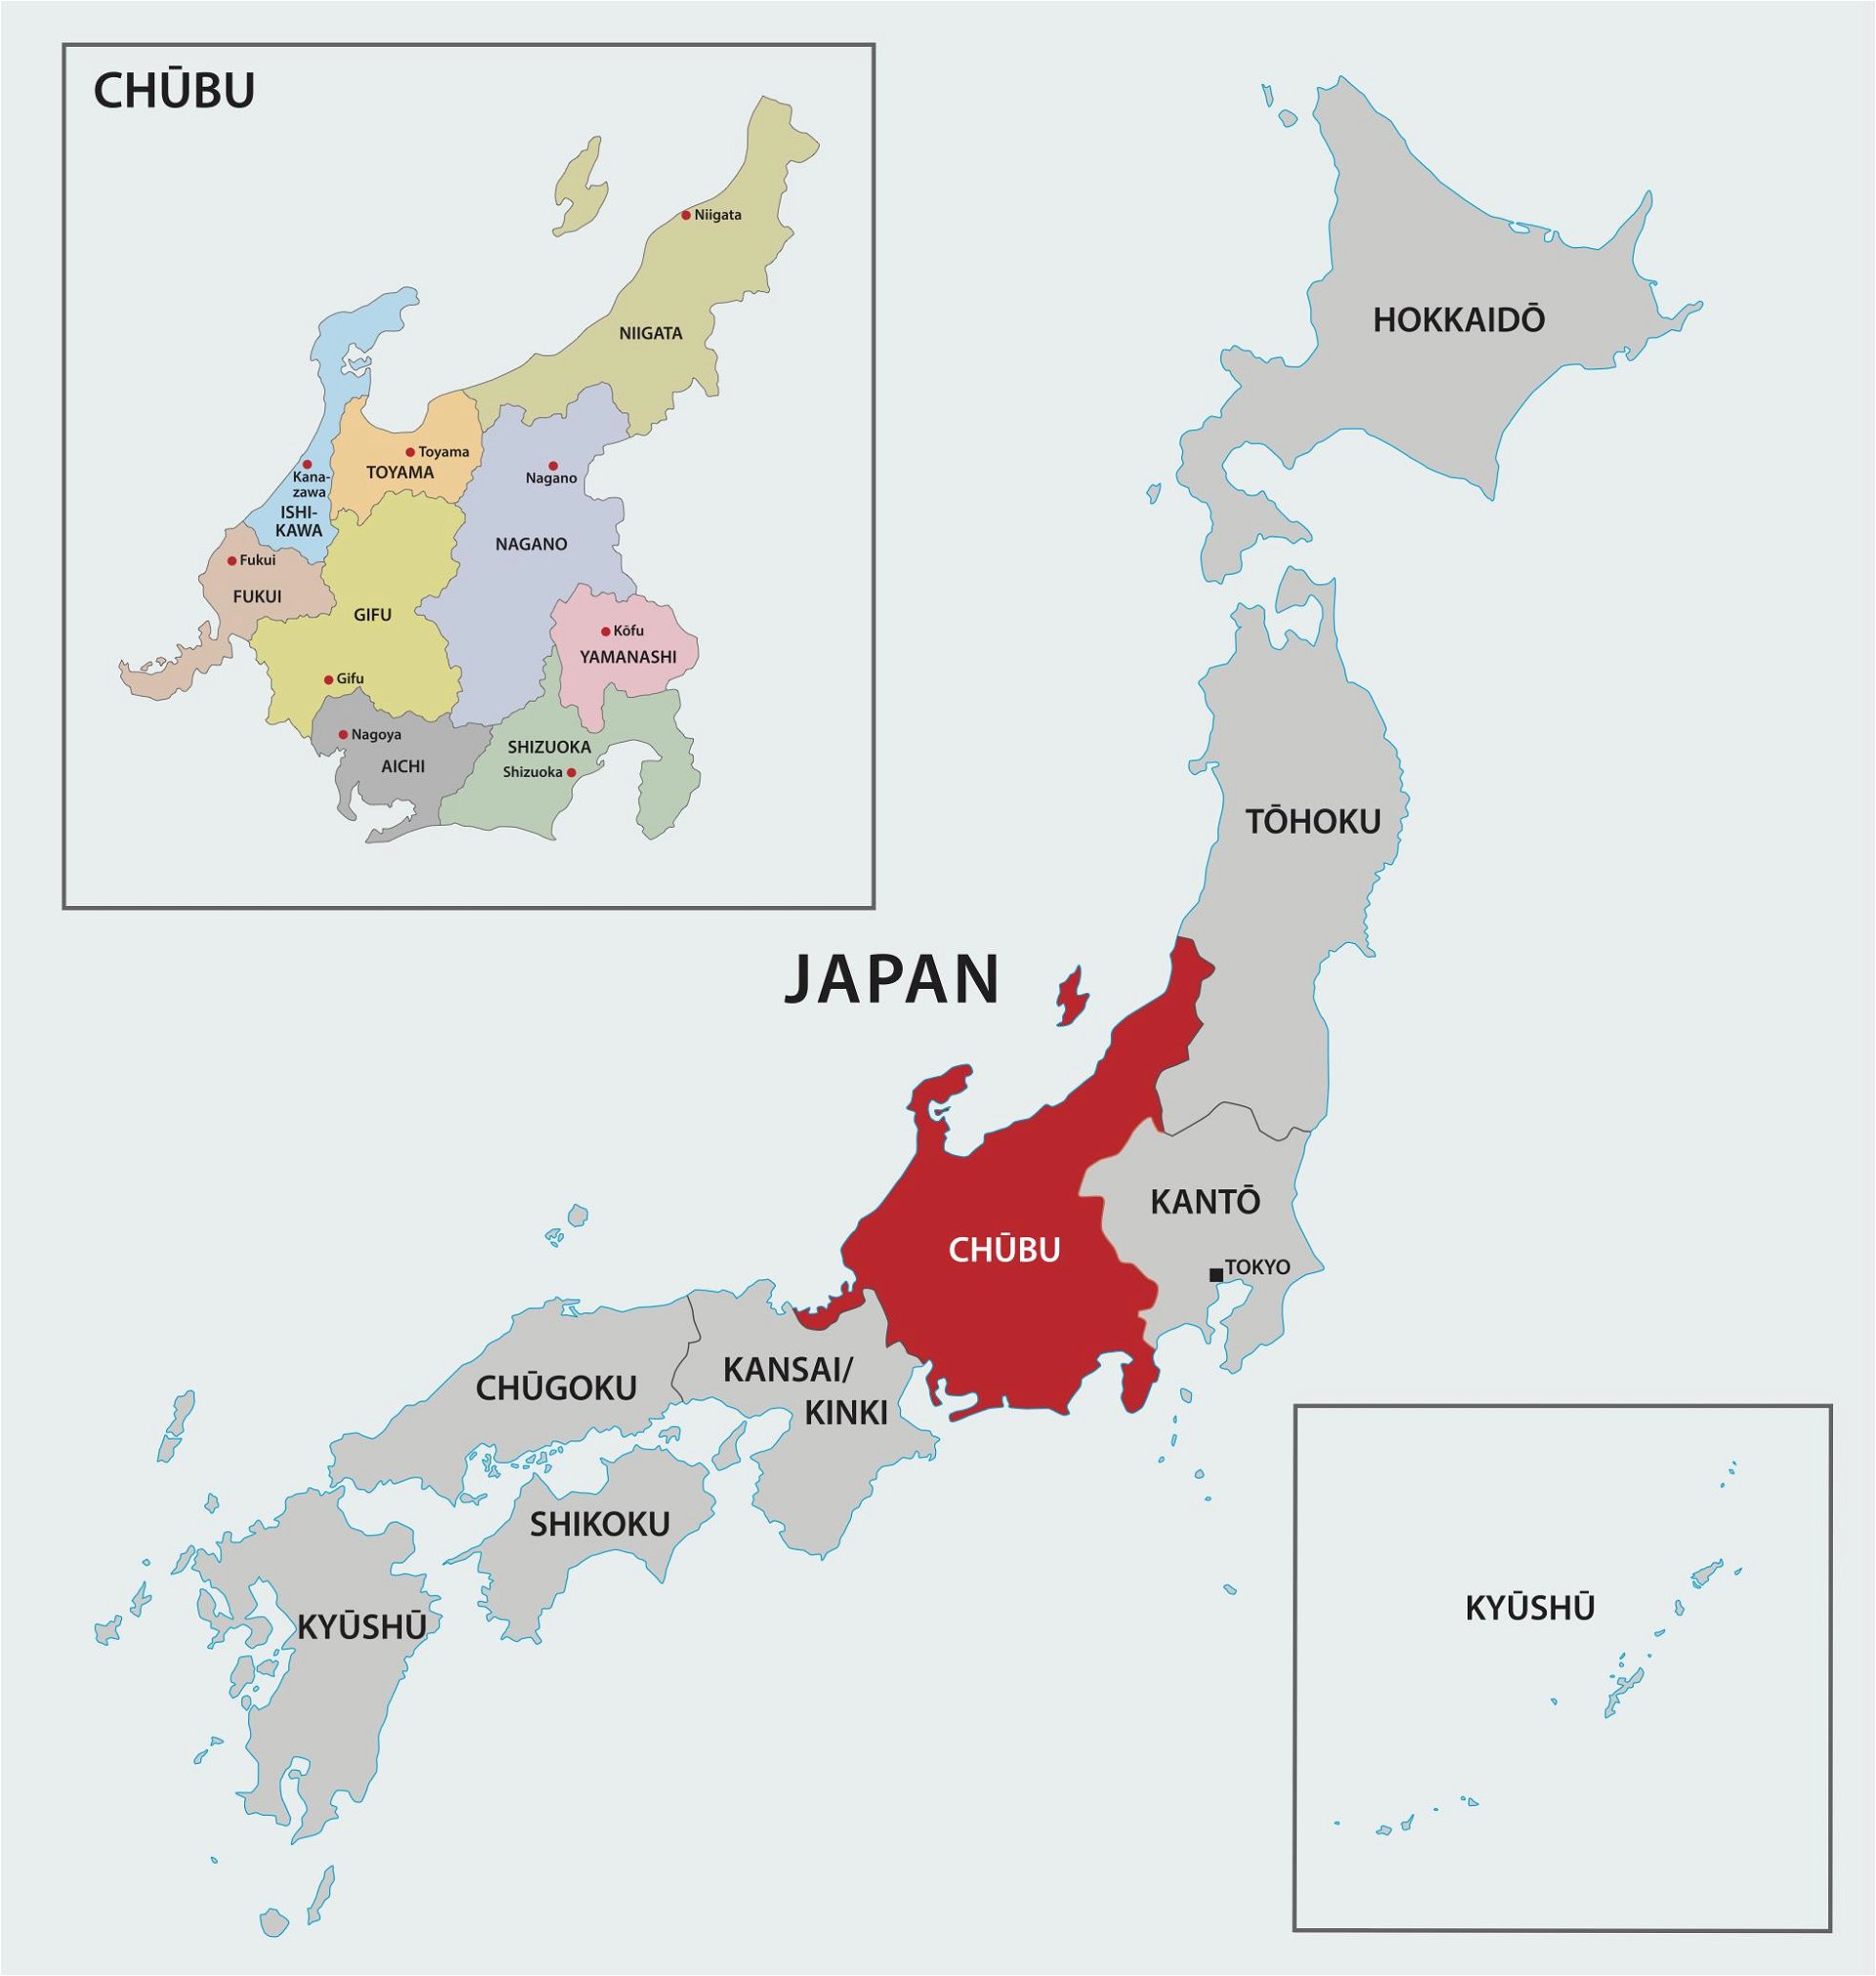 Map of Chubu region, Japan, including prefectures